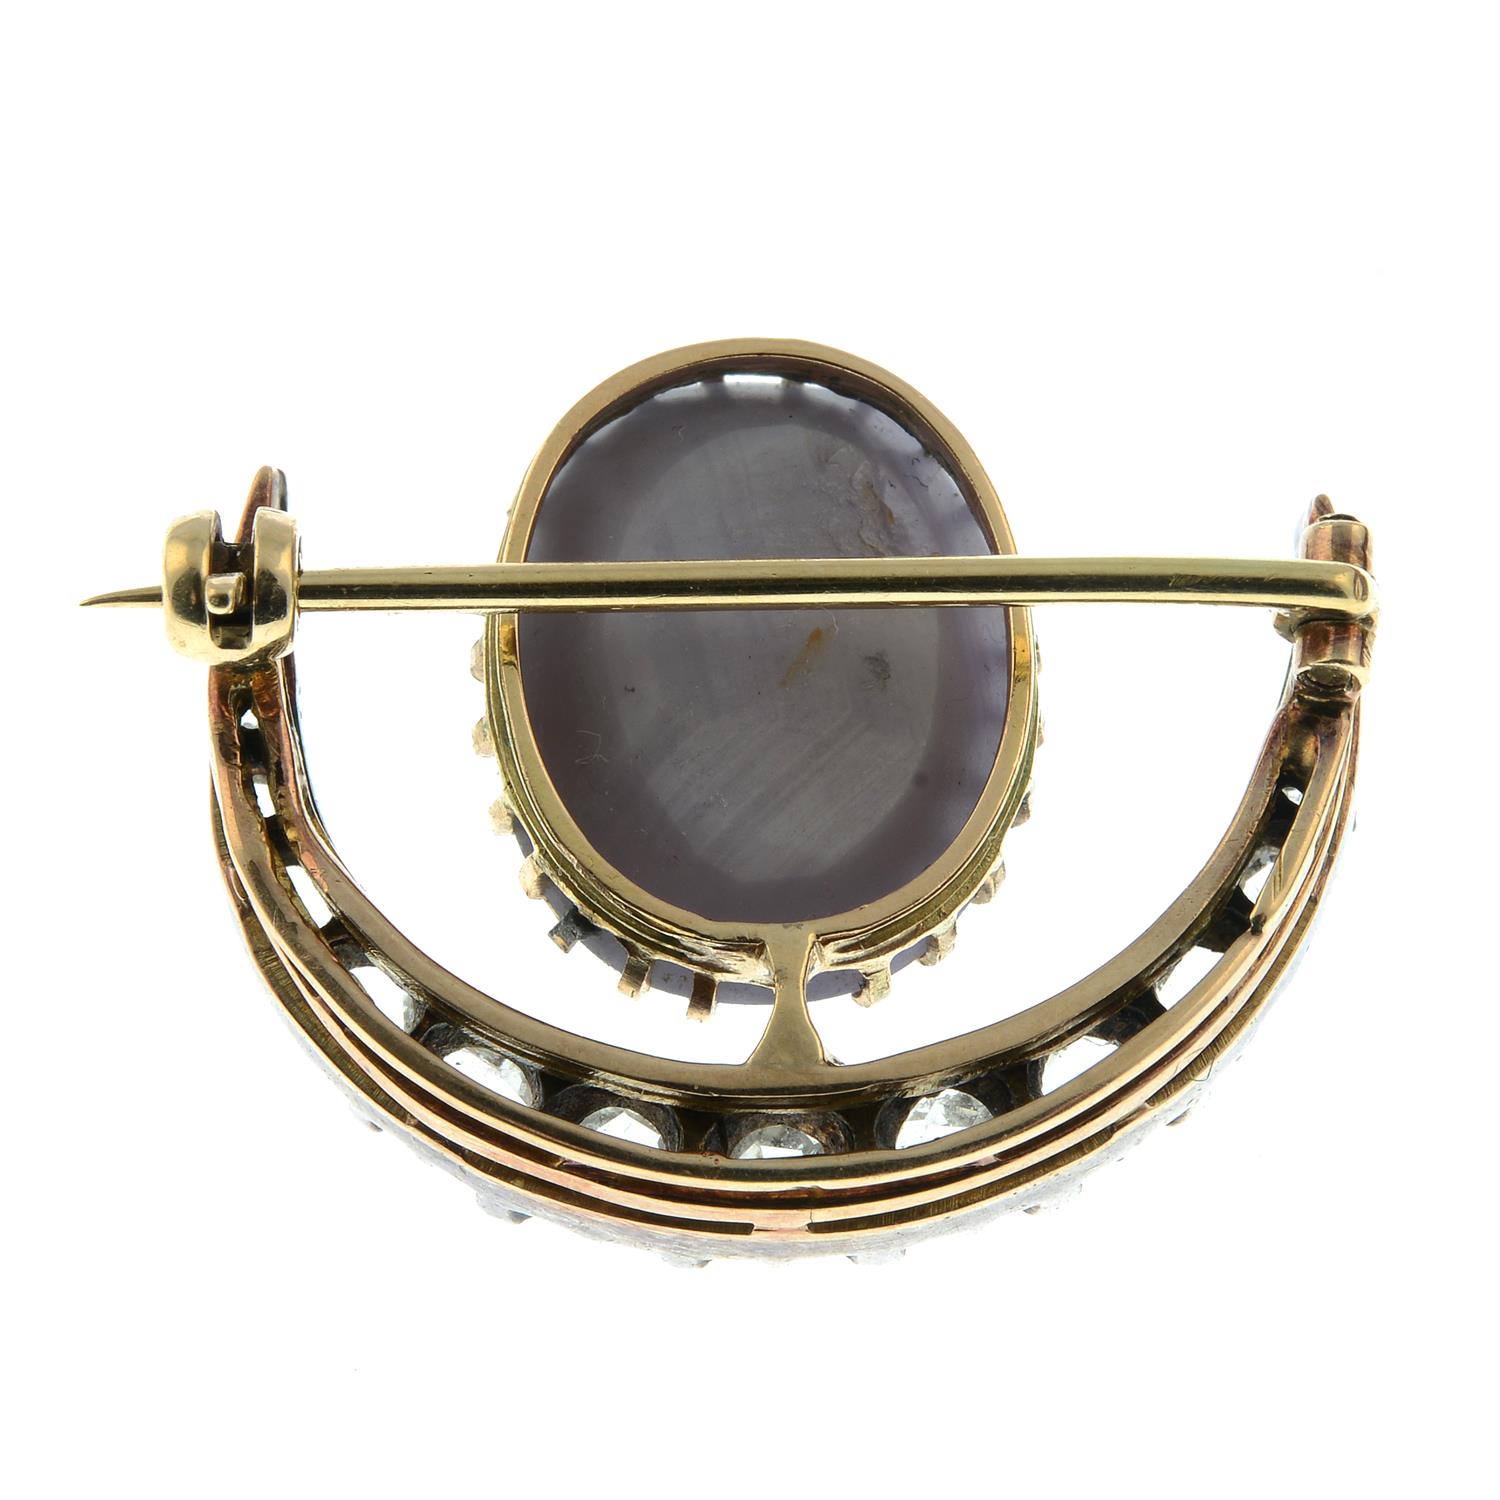 A late 19th century silver and gold rose-cut diamond crescent brooch, with star sapphire cabochon - Image 3 of 4